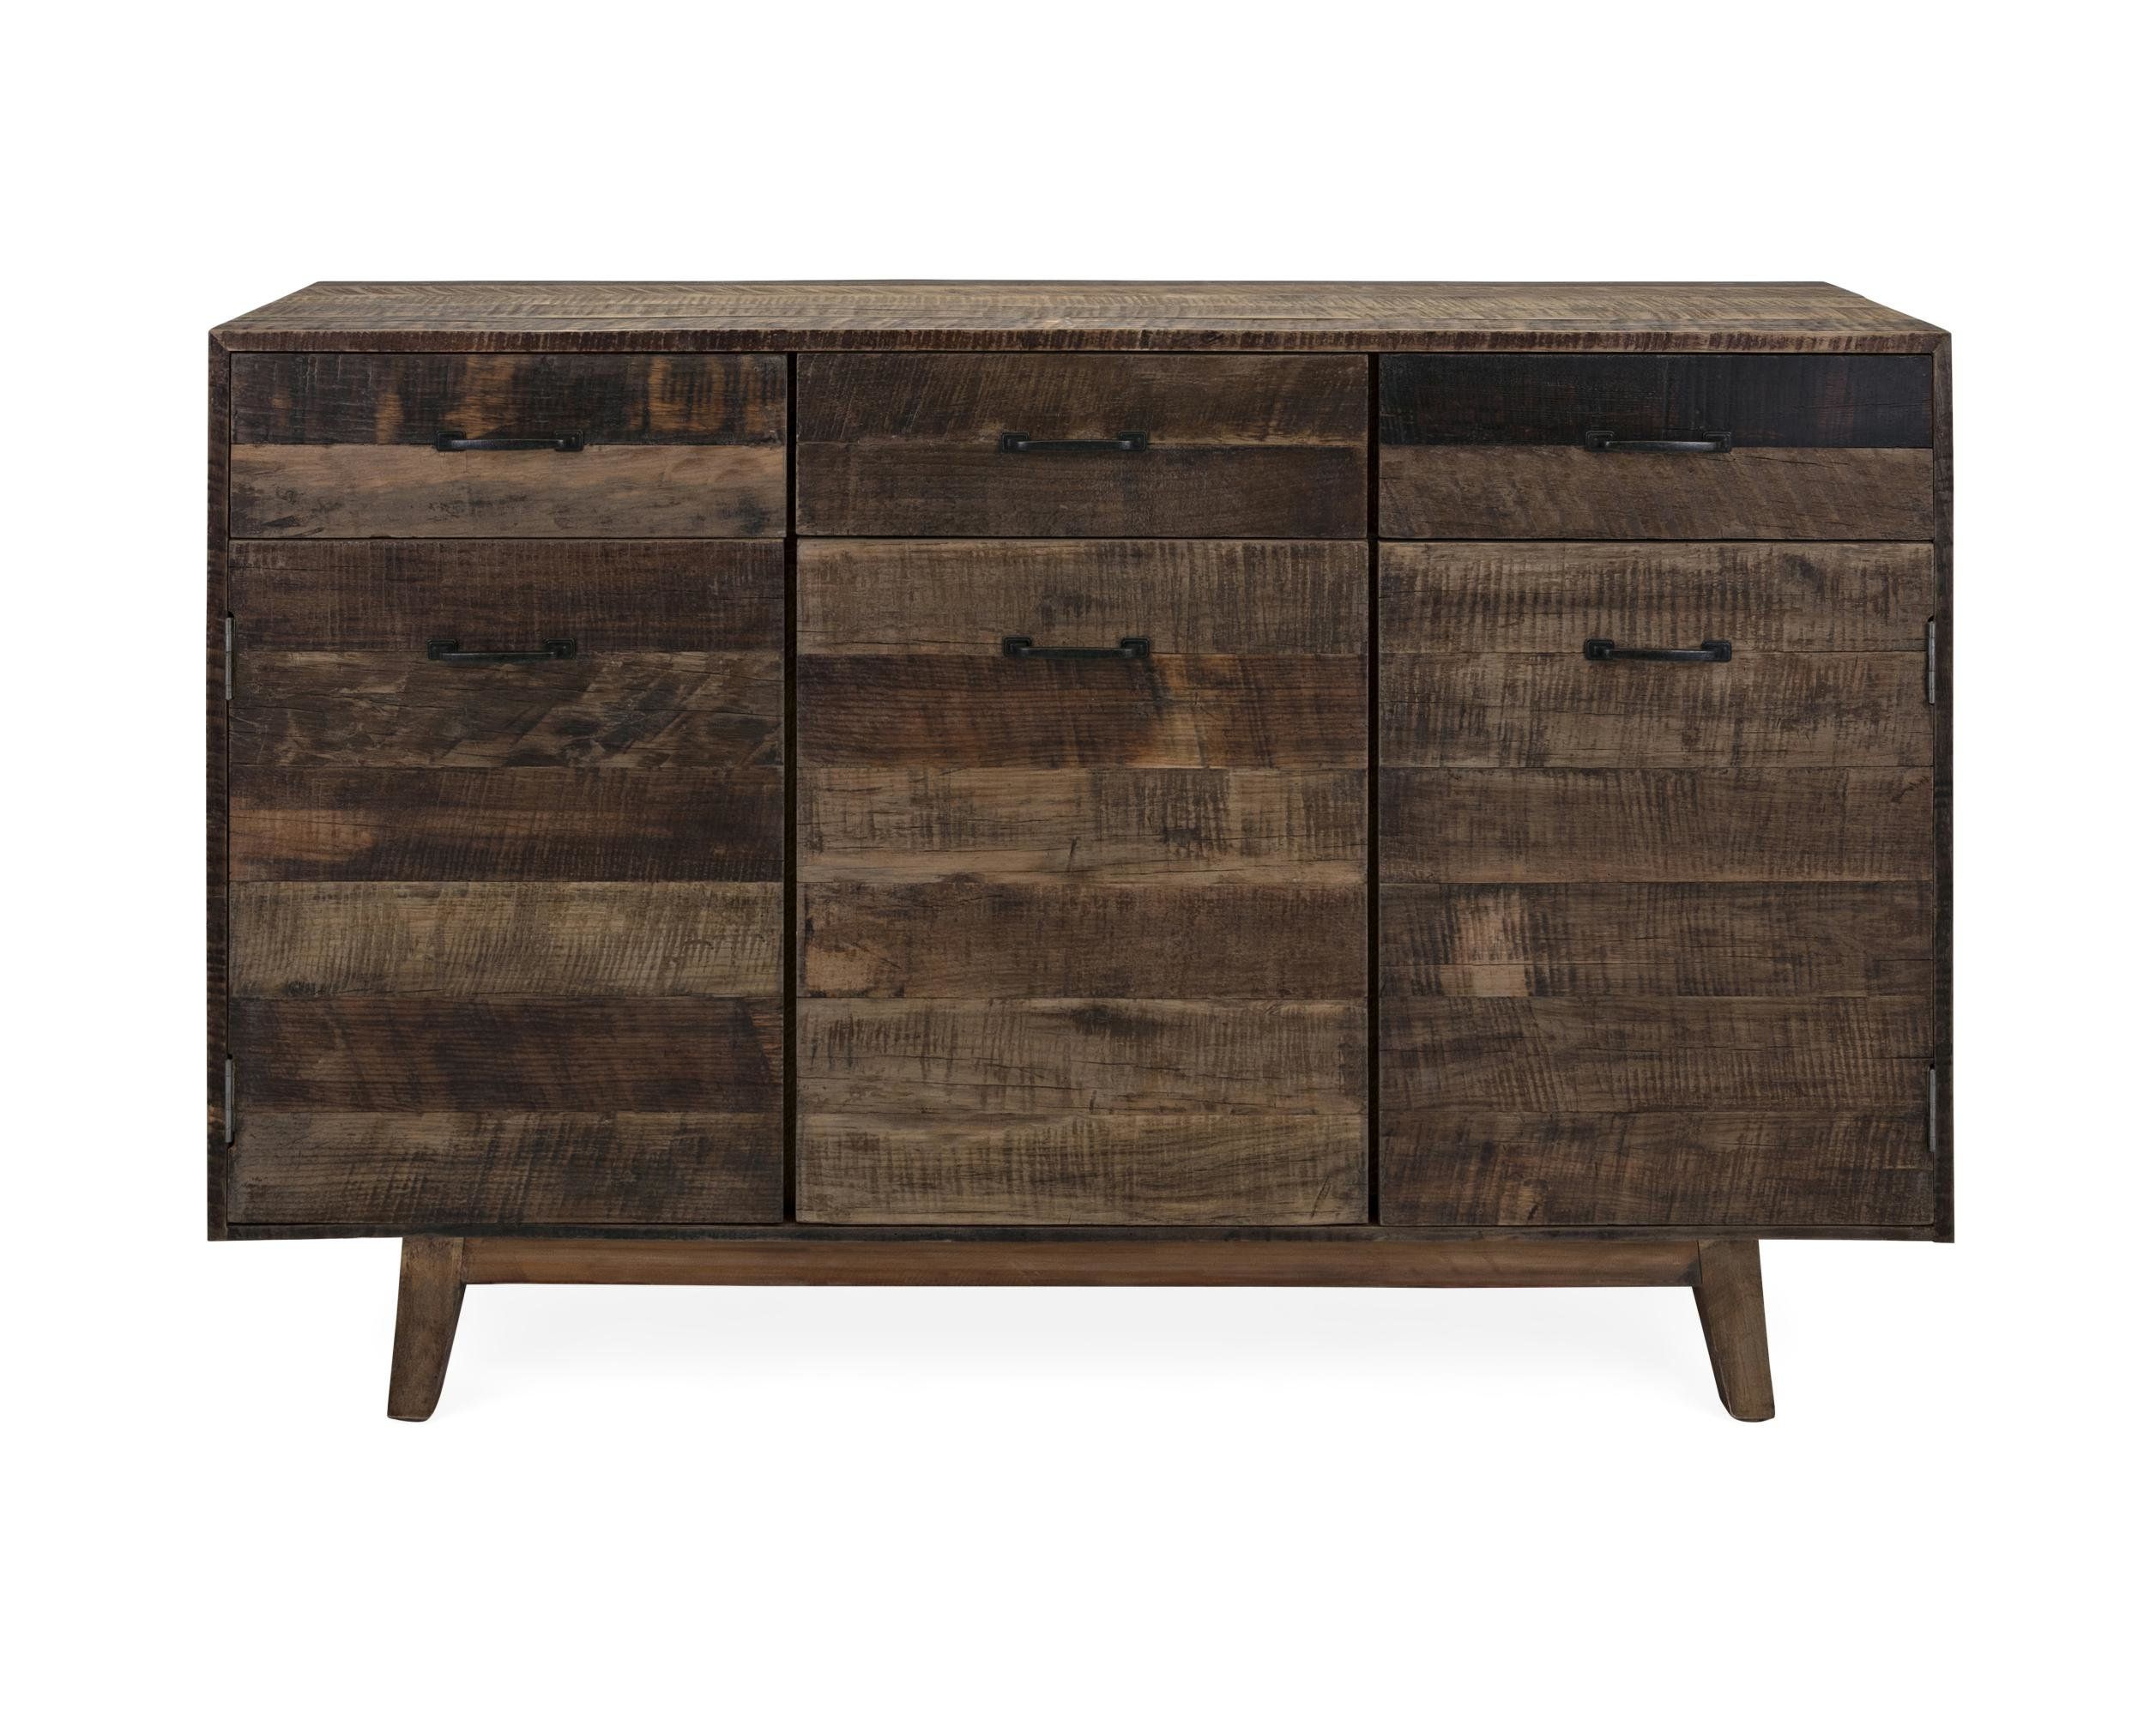 Carved Wood Buffet | Wayfair Intended For Most Up To Date Arminta Wood Sideboards (View 3 of 20)